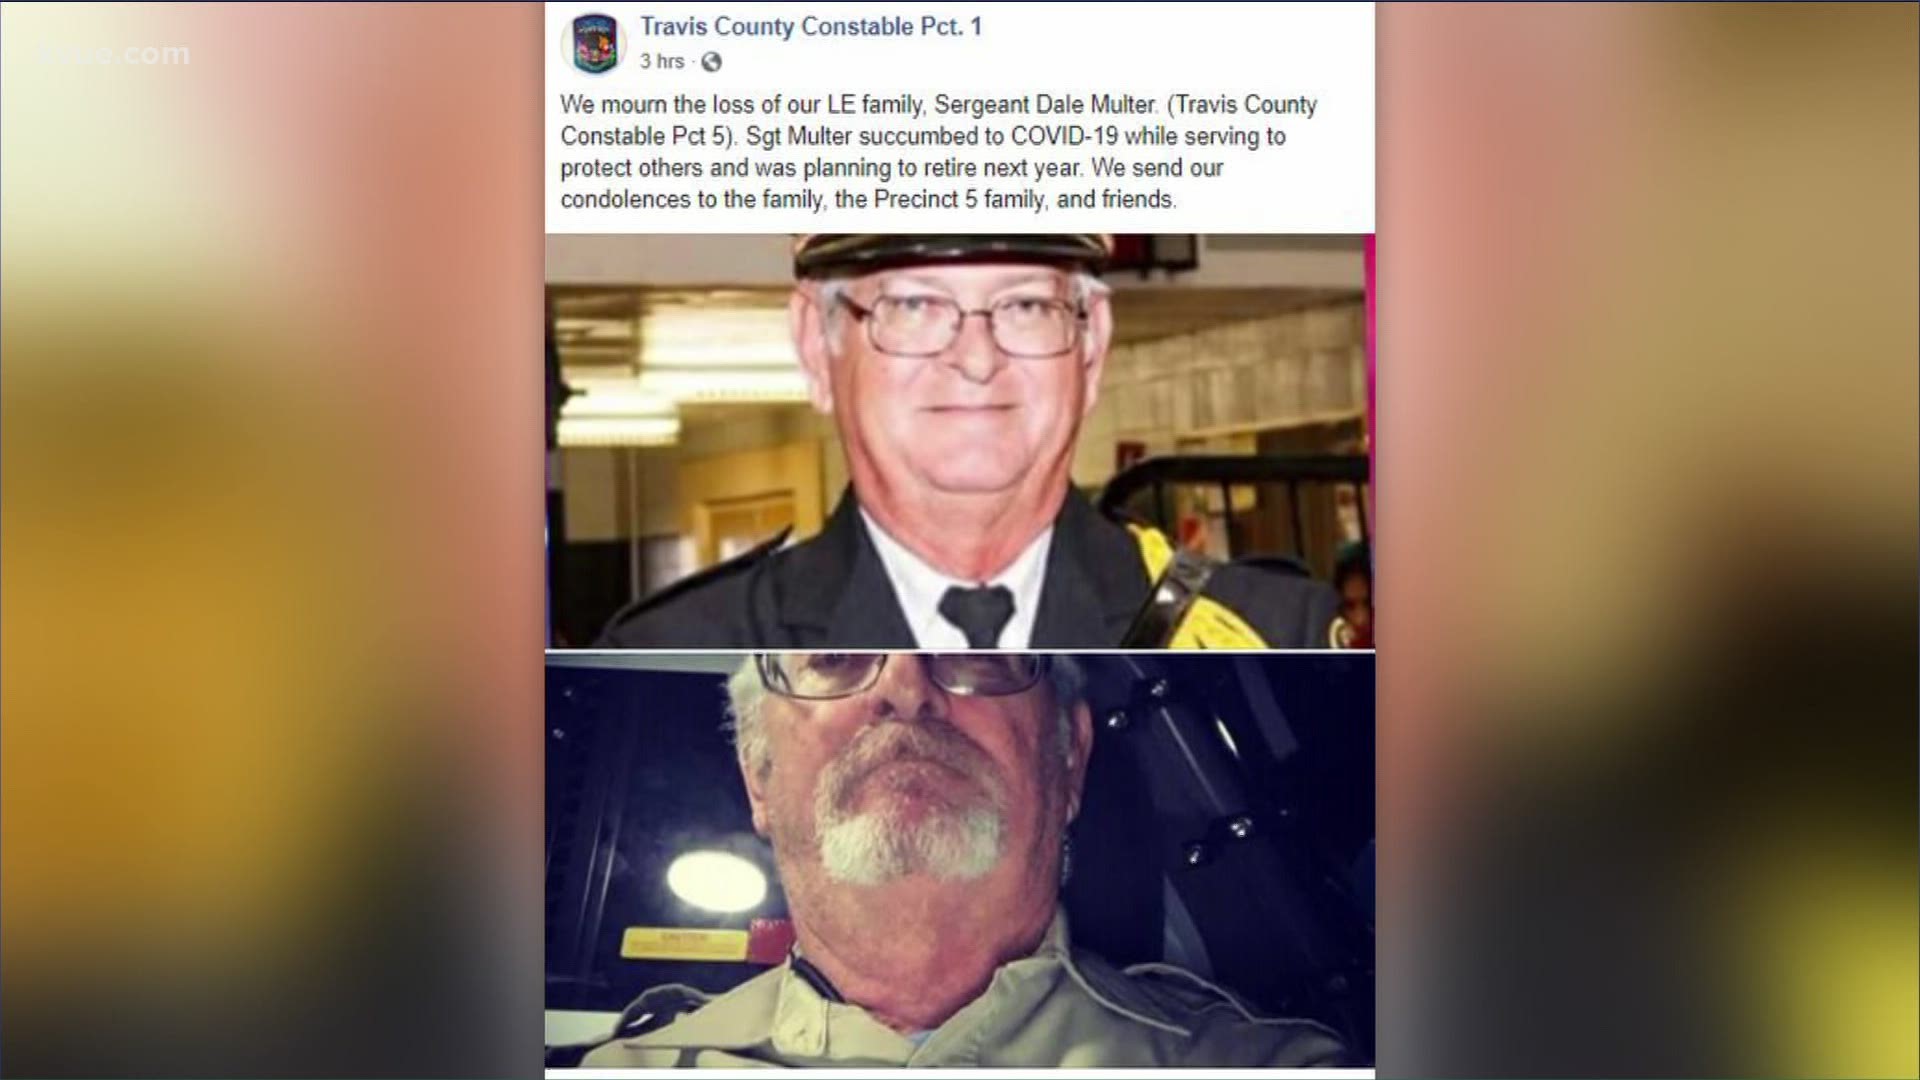 Sgt. Dale Multer, with Travis County Constable Pct. 5, has died from COVID-19. According to Travis County Constable Pct. 1, Multer was planning to retire next year.